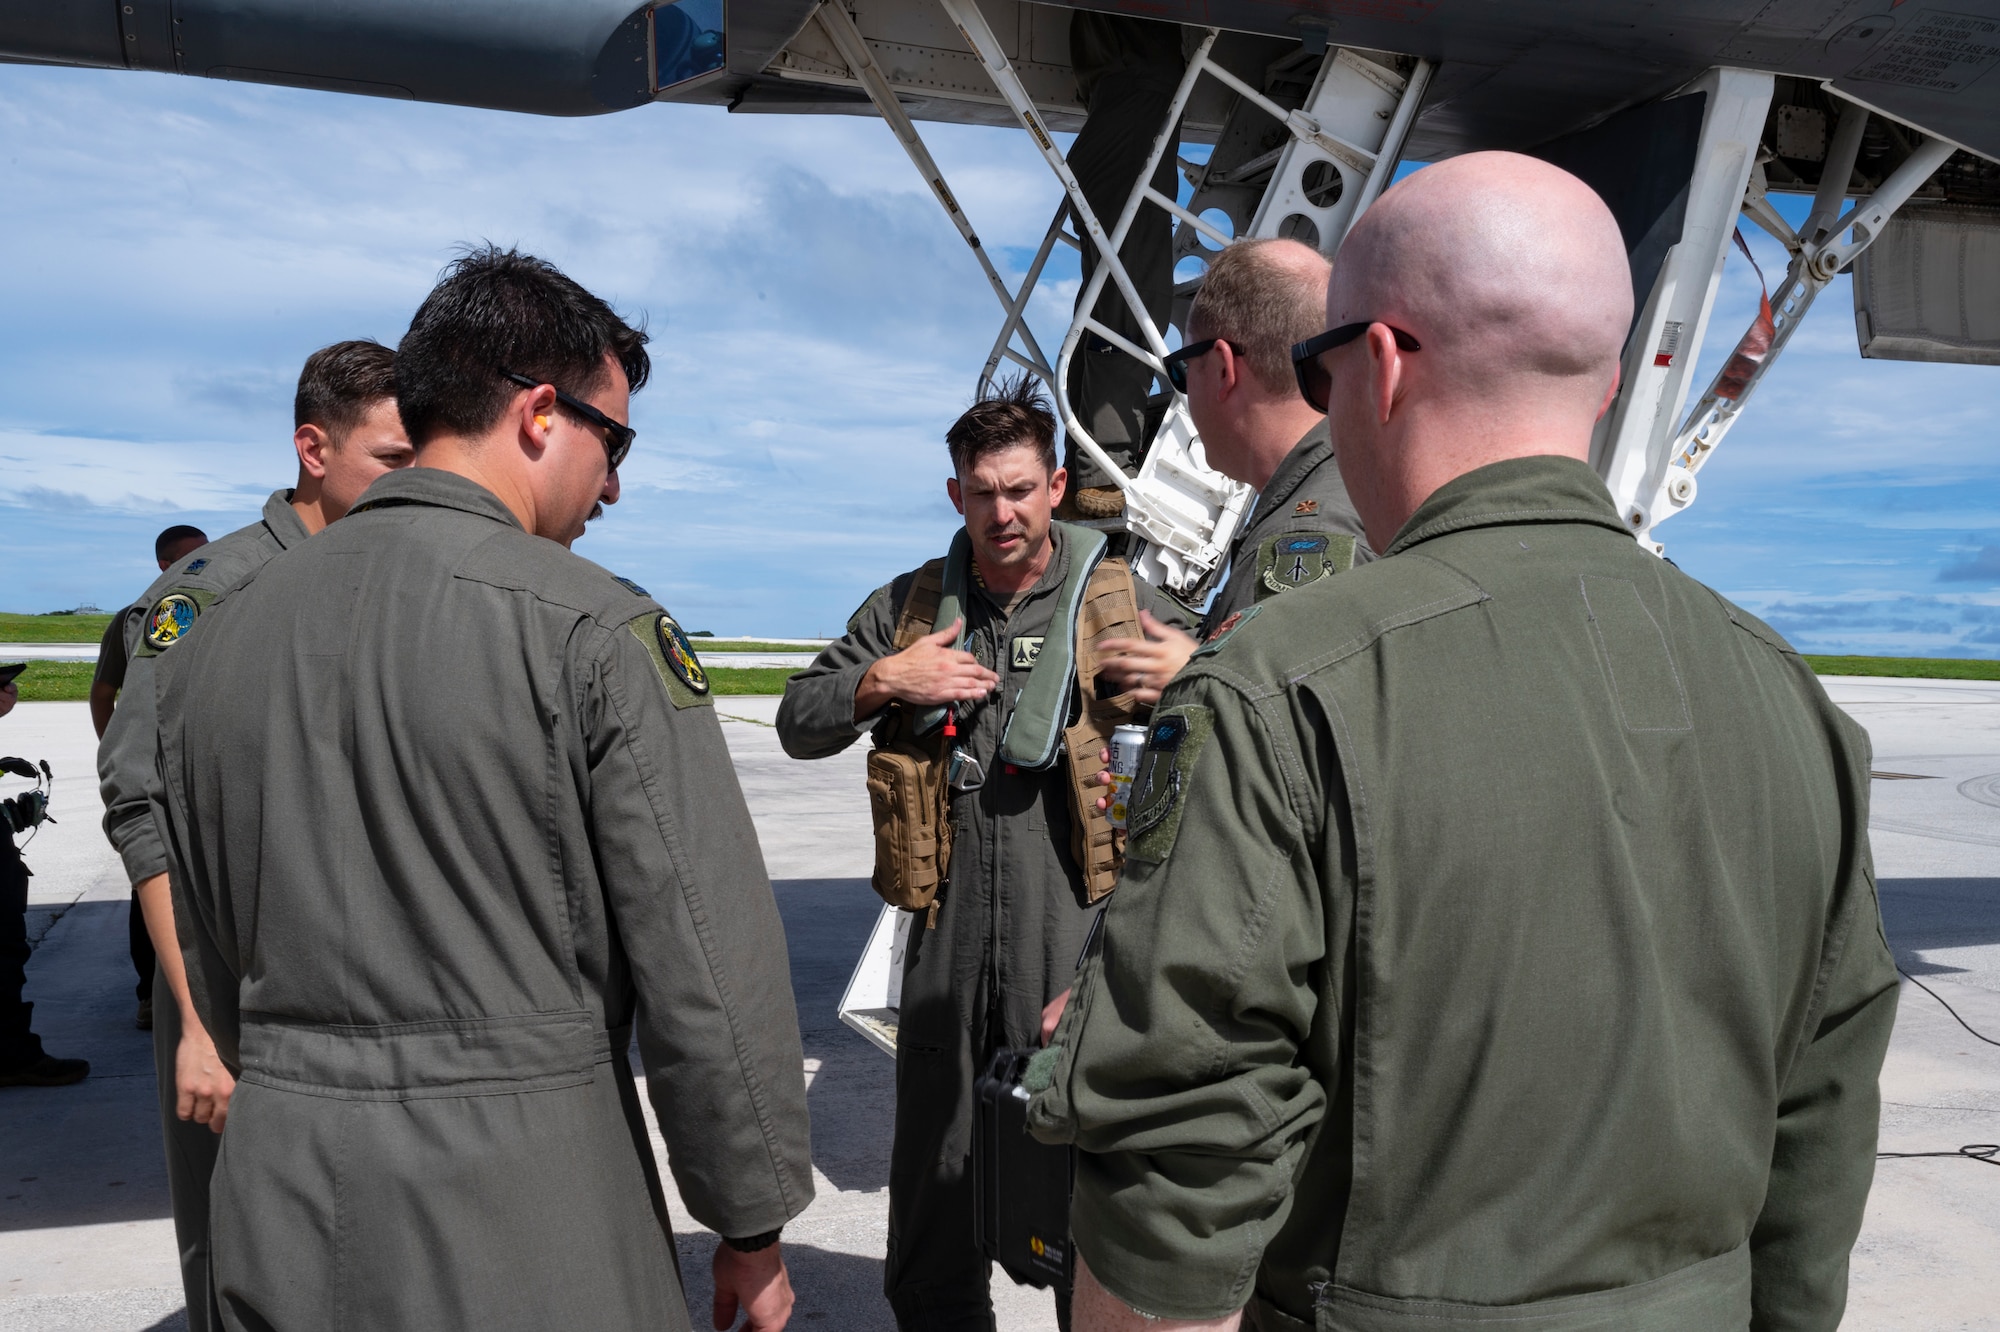 U.S. Air Force Col. Christopher McConnell, center, 37th Expeditionary Bomb Squadron commander, is greeted by aircrew upon arrival at Andersen Air Force Base, Guam, Oct. 18, 2022. Bomber Task Force missions support the National Defense Strategy objectives of strategic predictability and operational unpredictability through the speed, flexibility, and readiness of our strategic bombers. (U.S. Air Force photo by Staff Sgt. Hannah Malone)